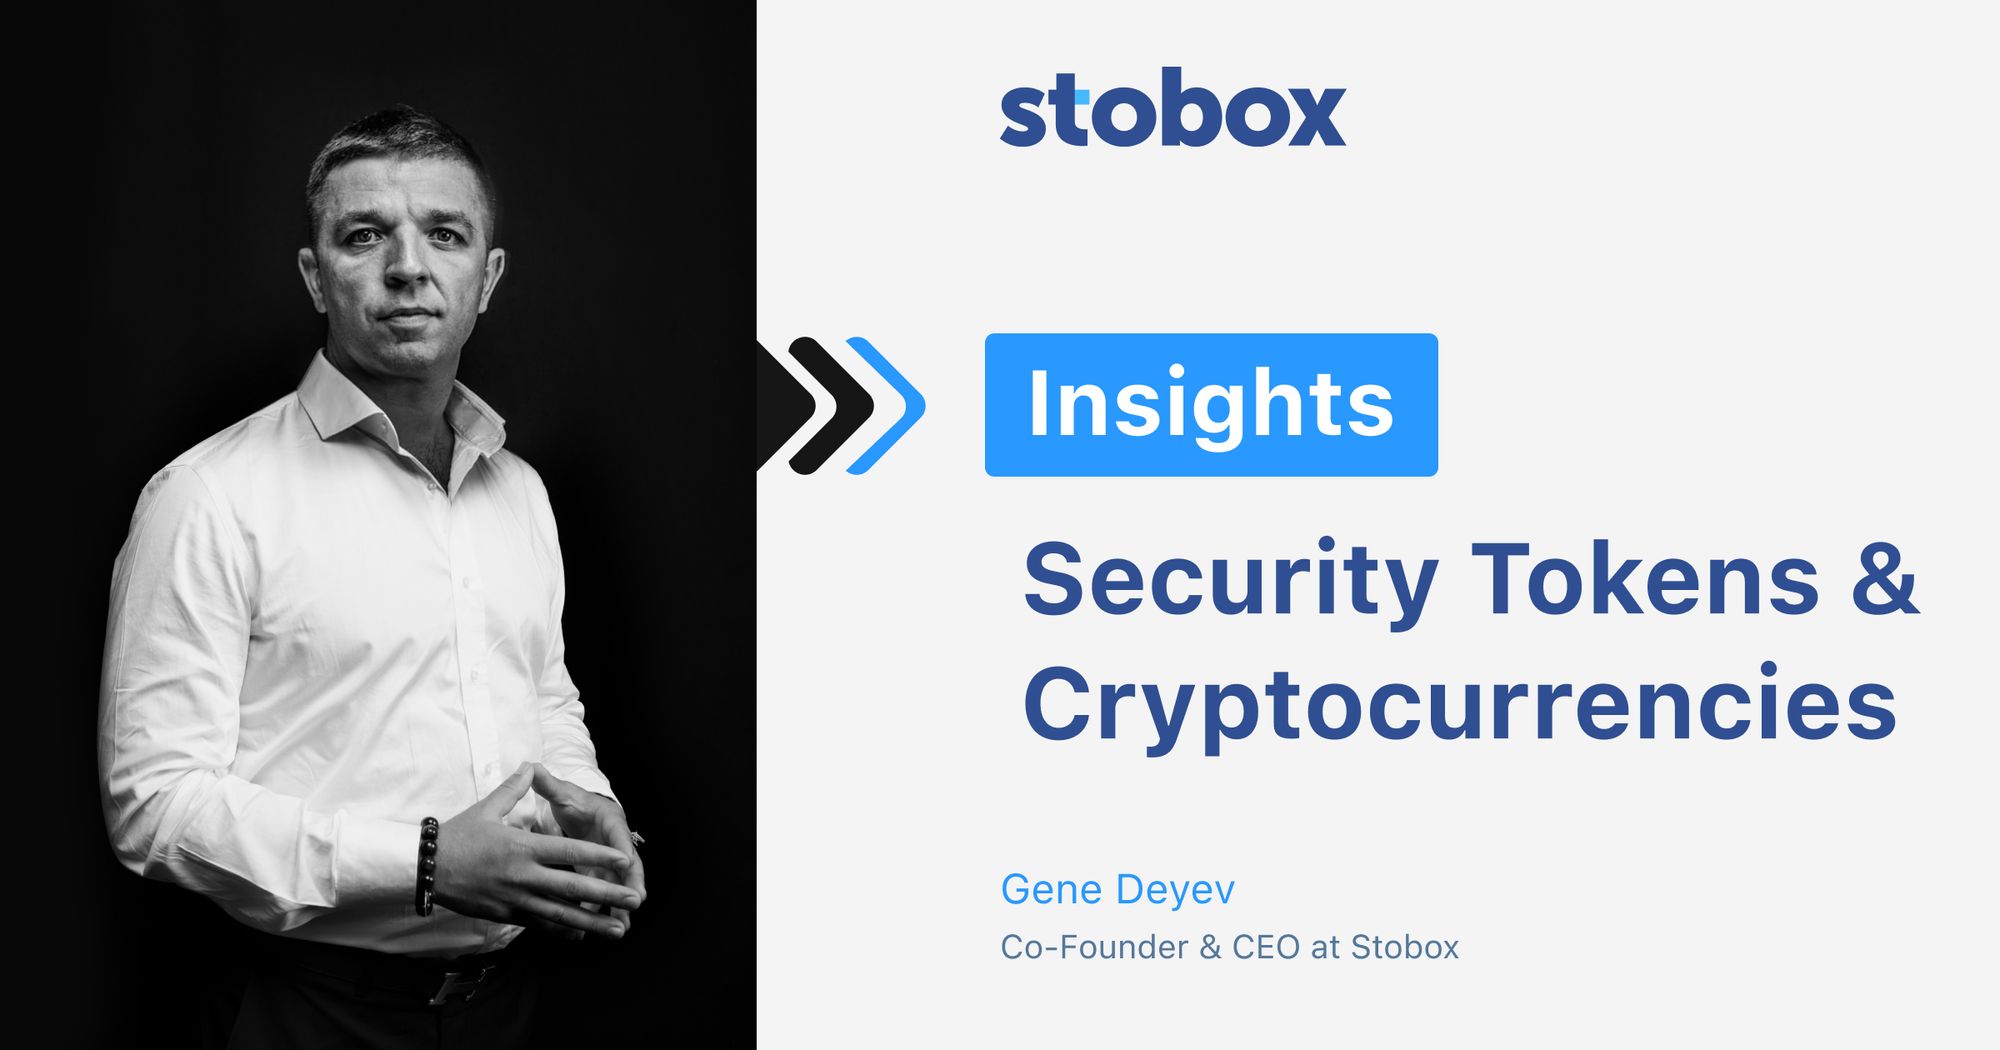 Why do problems with the crypto market positively affect the security token market?